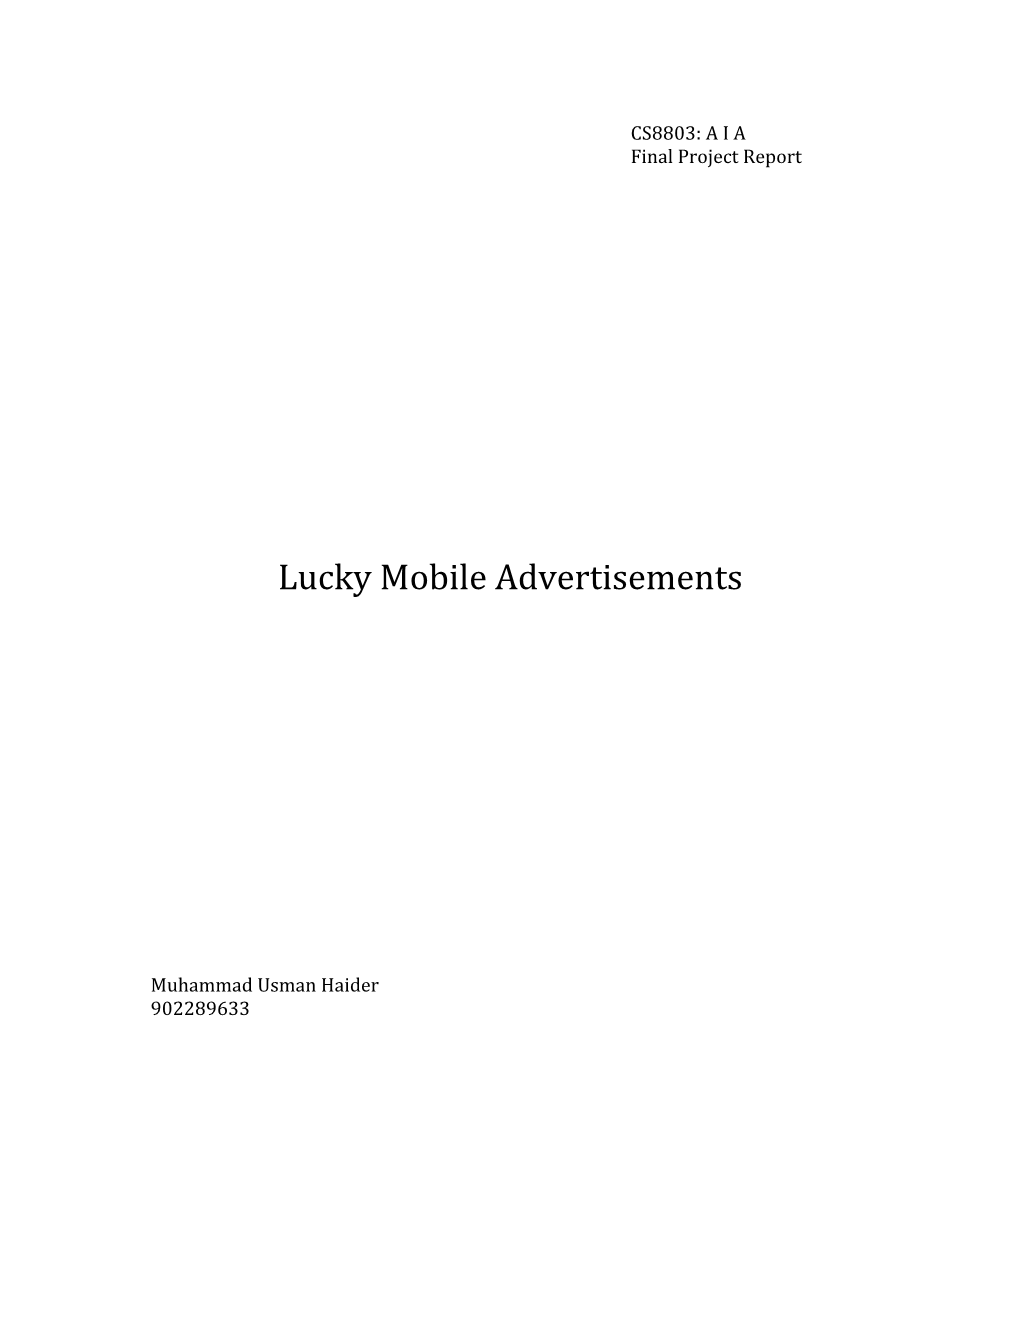 Lucky Mobile Advertisements